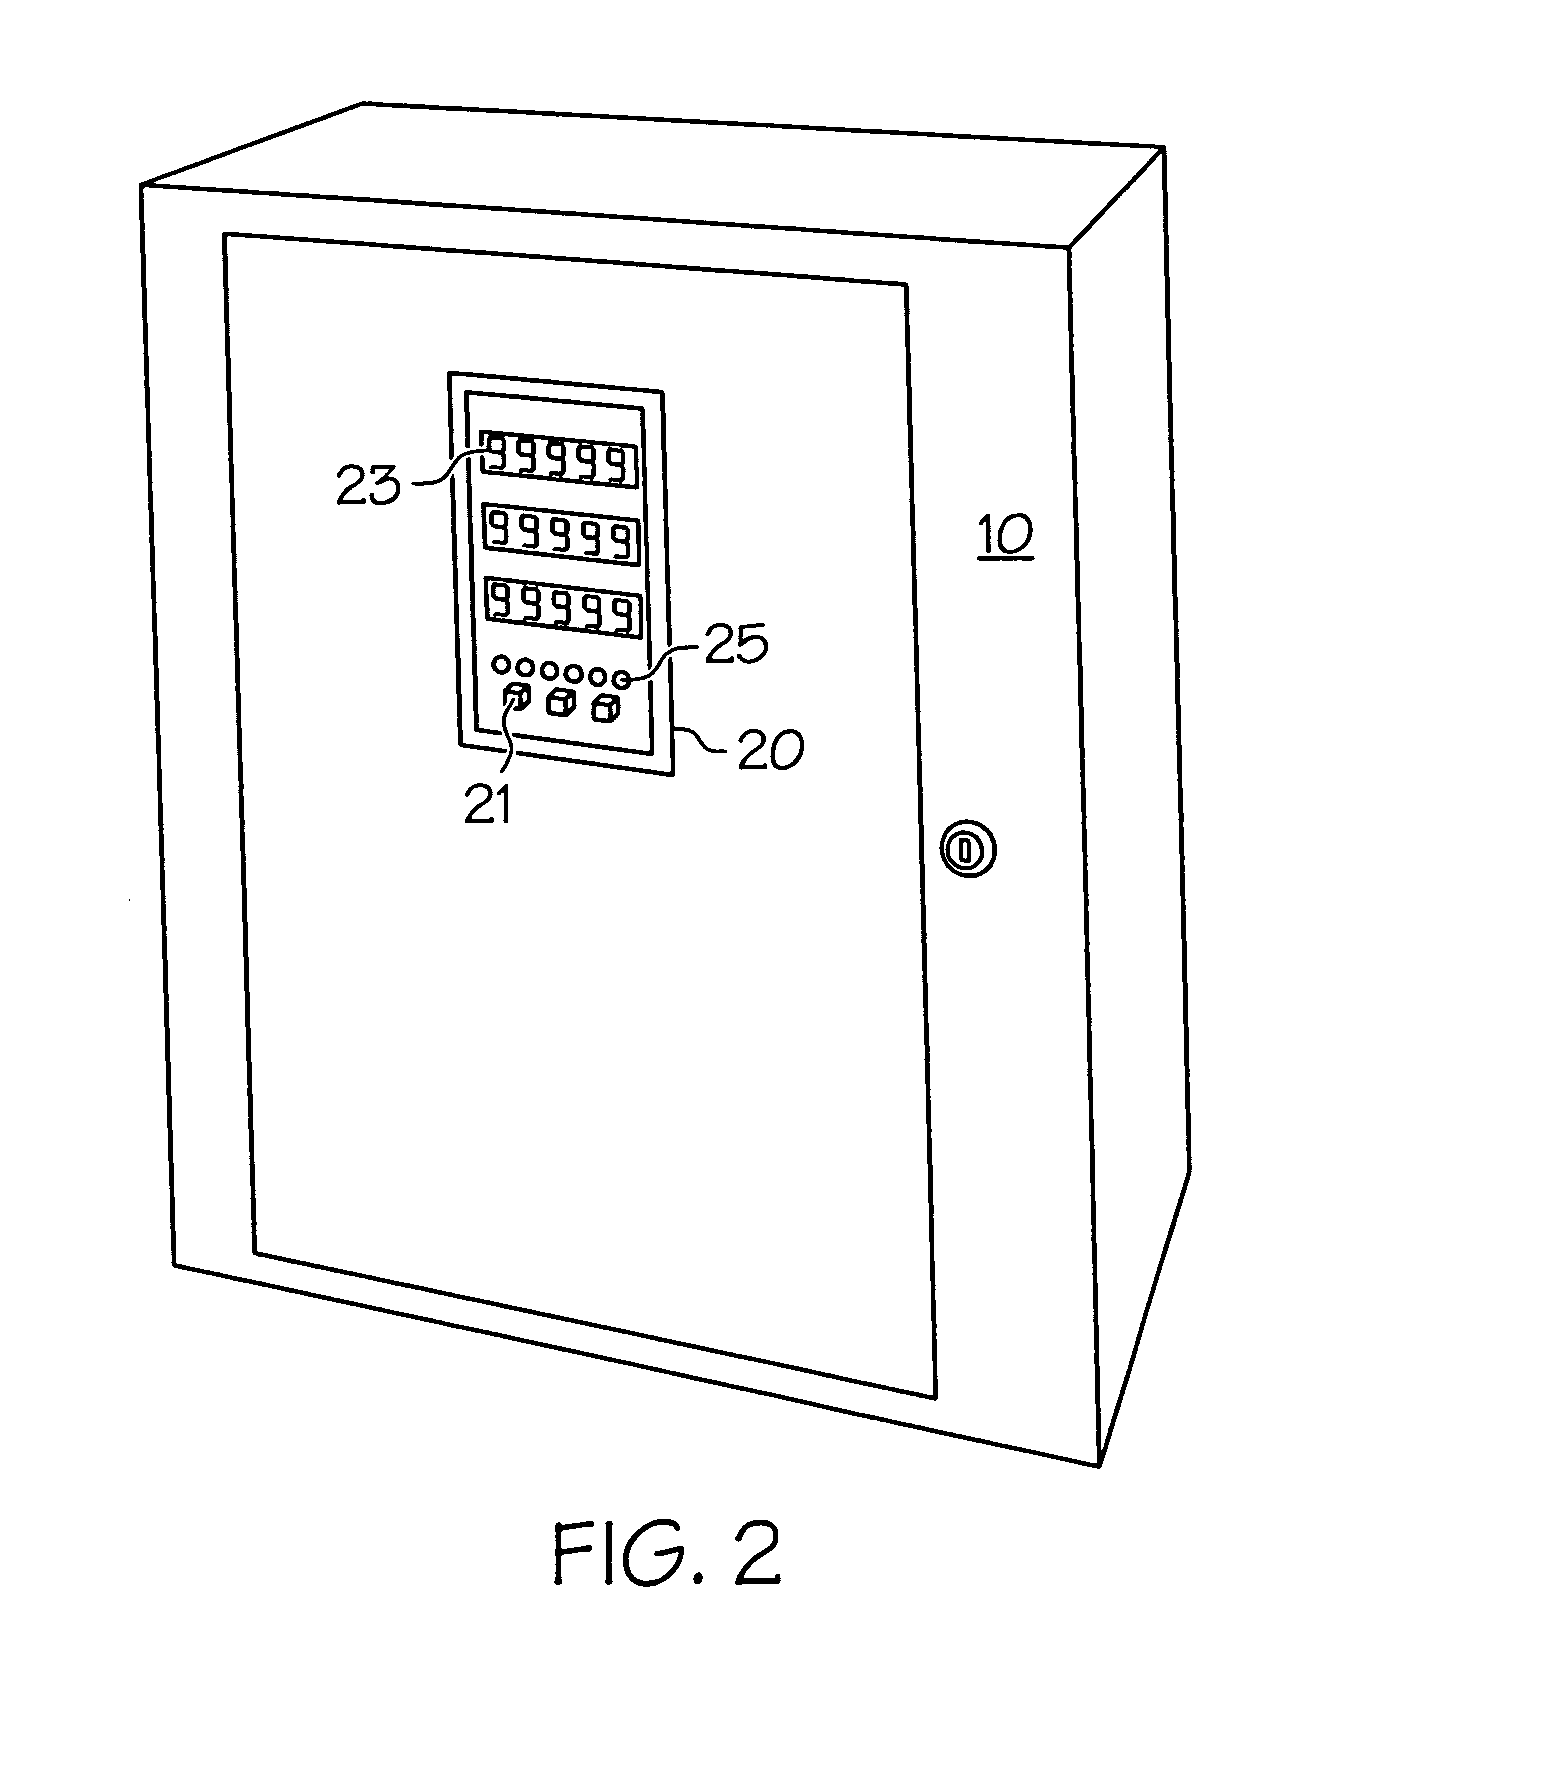 Methods and systems for load bank control and operation